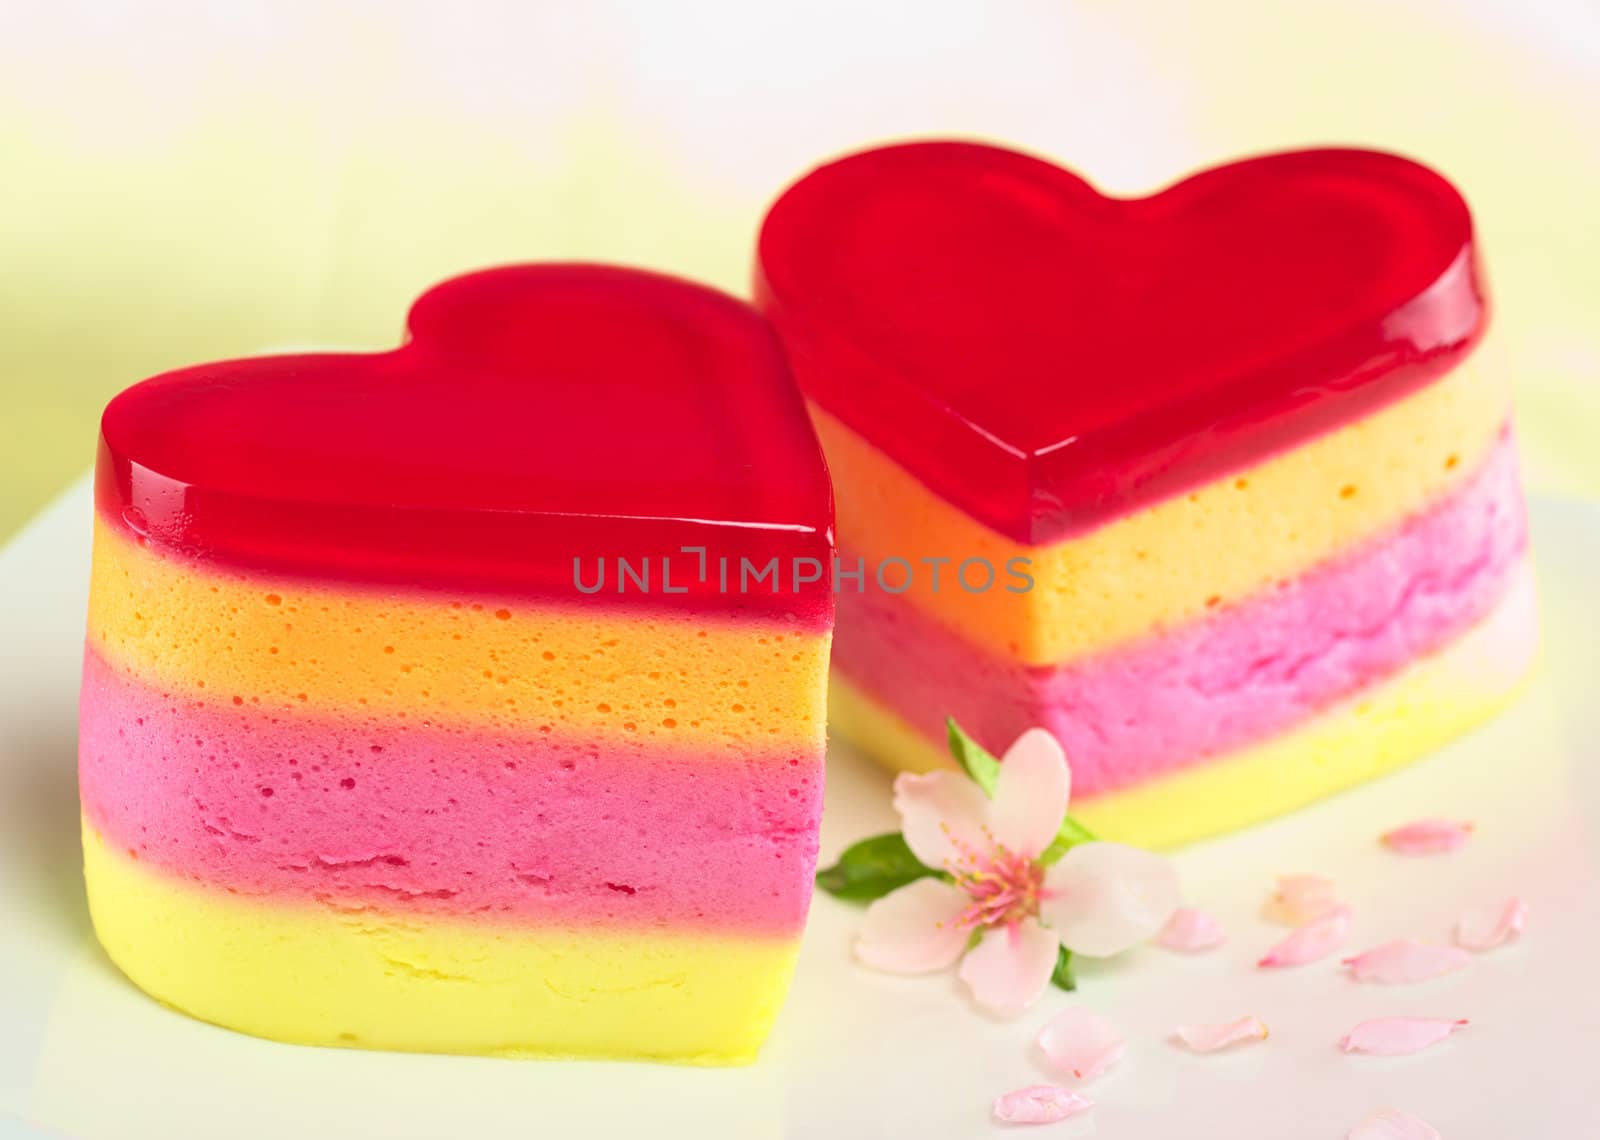 Colorful Peruvian heart-shaped jelly-pudding cakes called Torta Helada with a peach blossom on the plate (Selective Focus, Focus on the three upper lines on the front of the left cake)